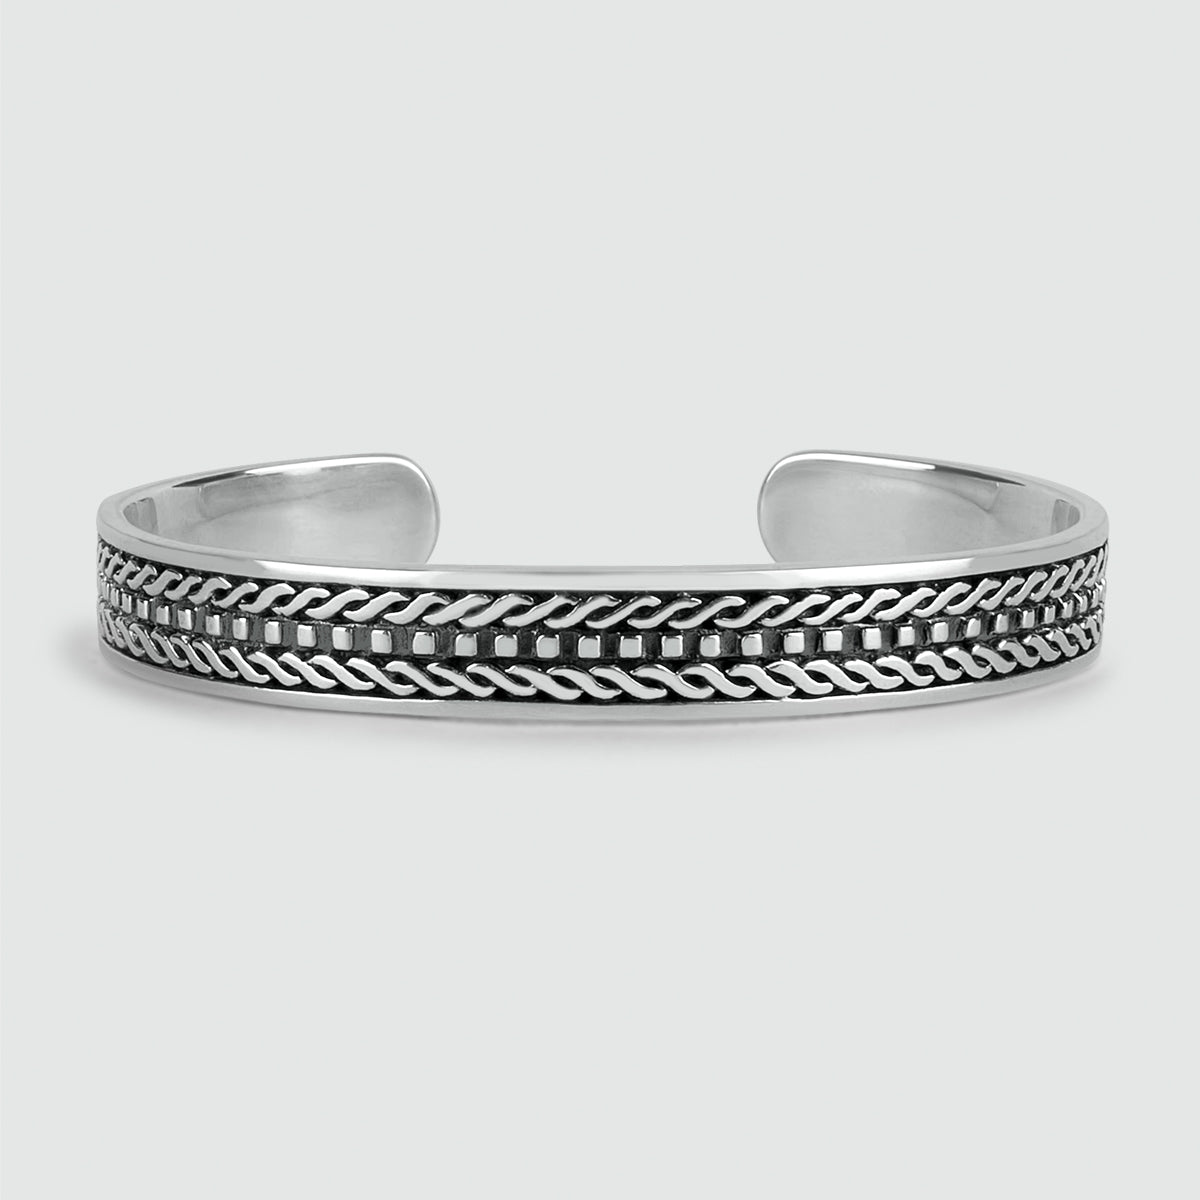 92.5 Silver Cuff For Men - Silver Palace